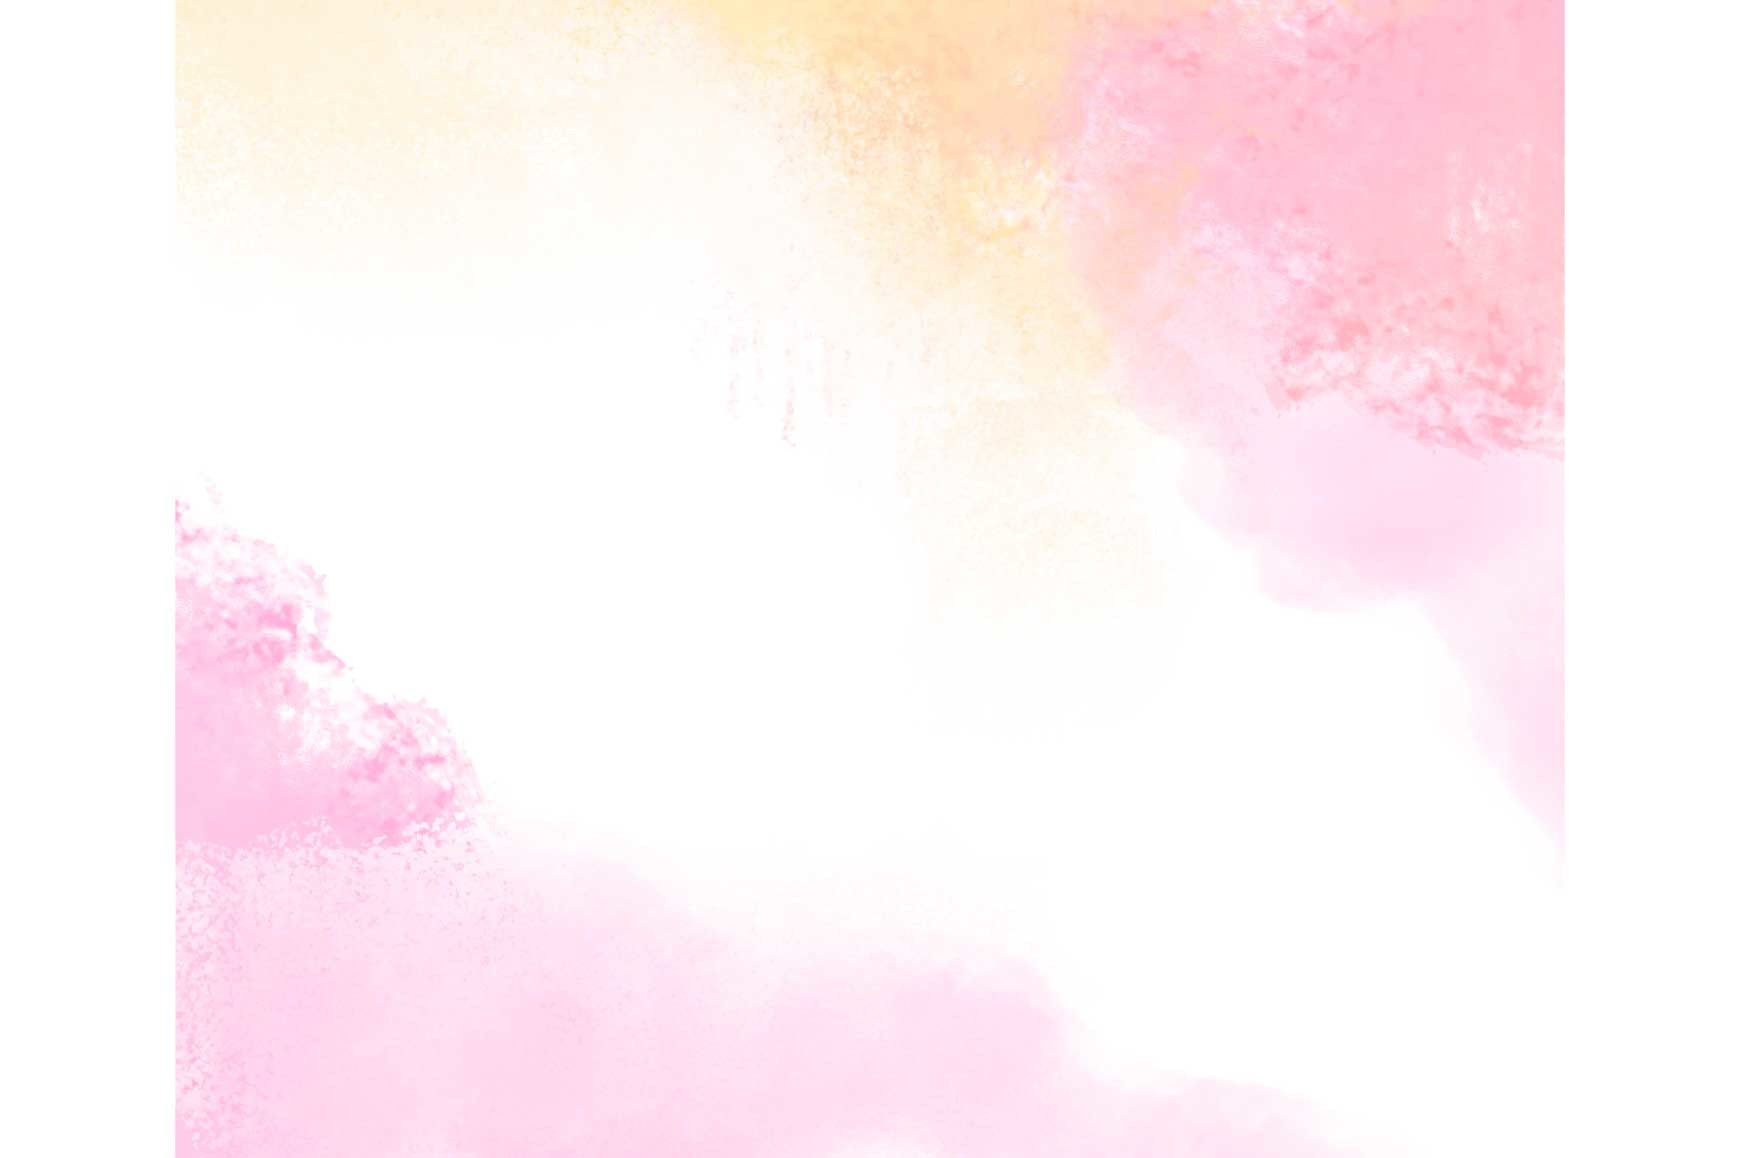 https://www.creativefabrica.com/wp-content/uploads/2023/05/29/Soft-Pink-mixed-watercolor-background-Graphics-70837257-1.jpg